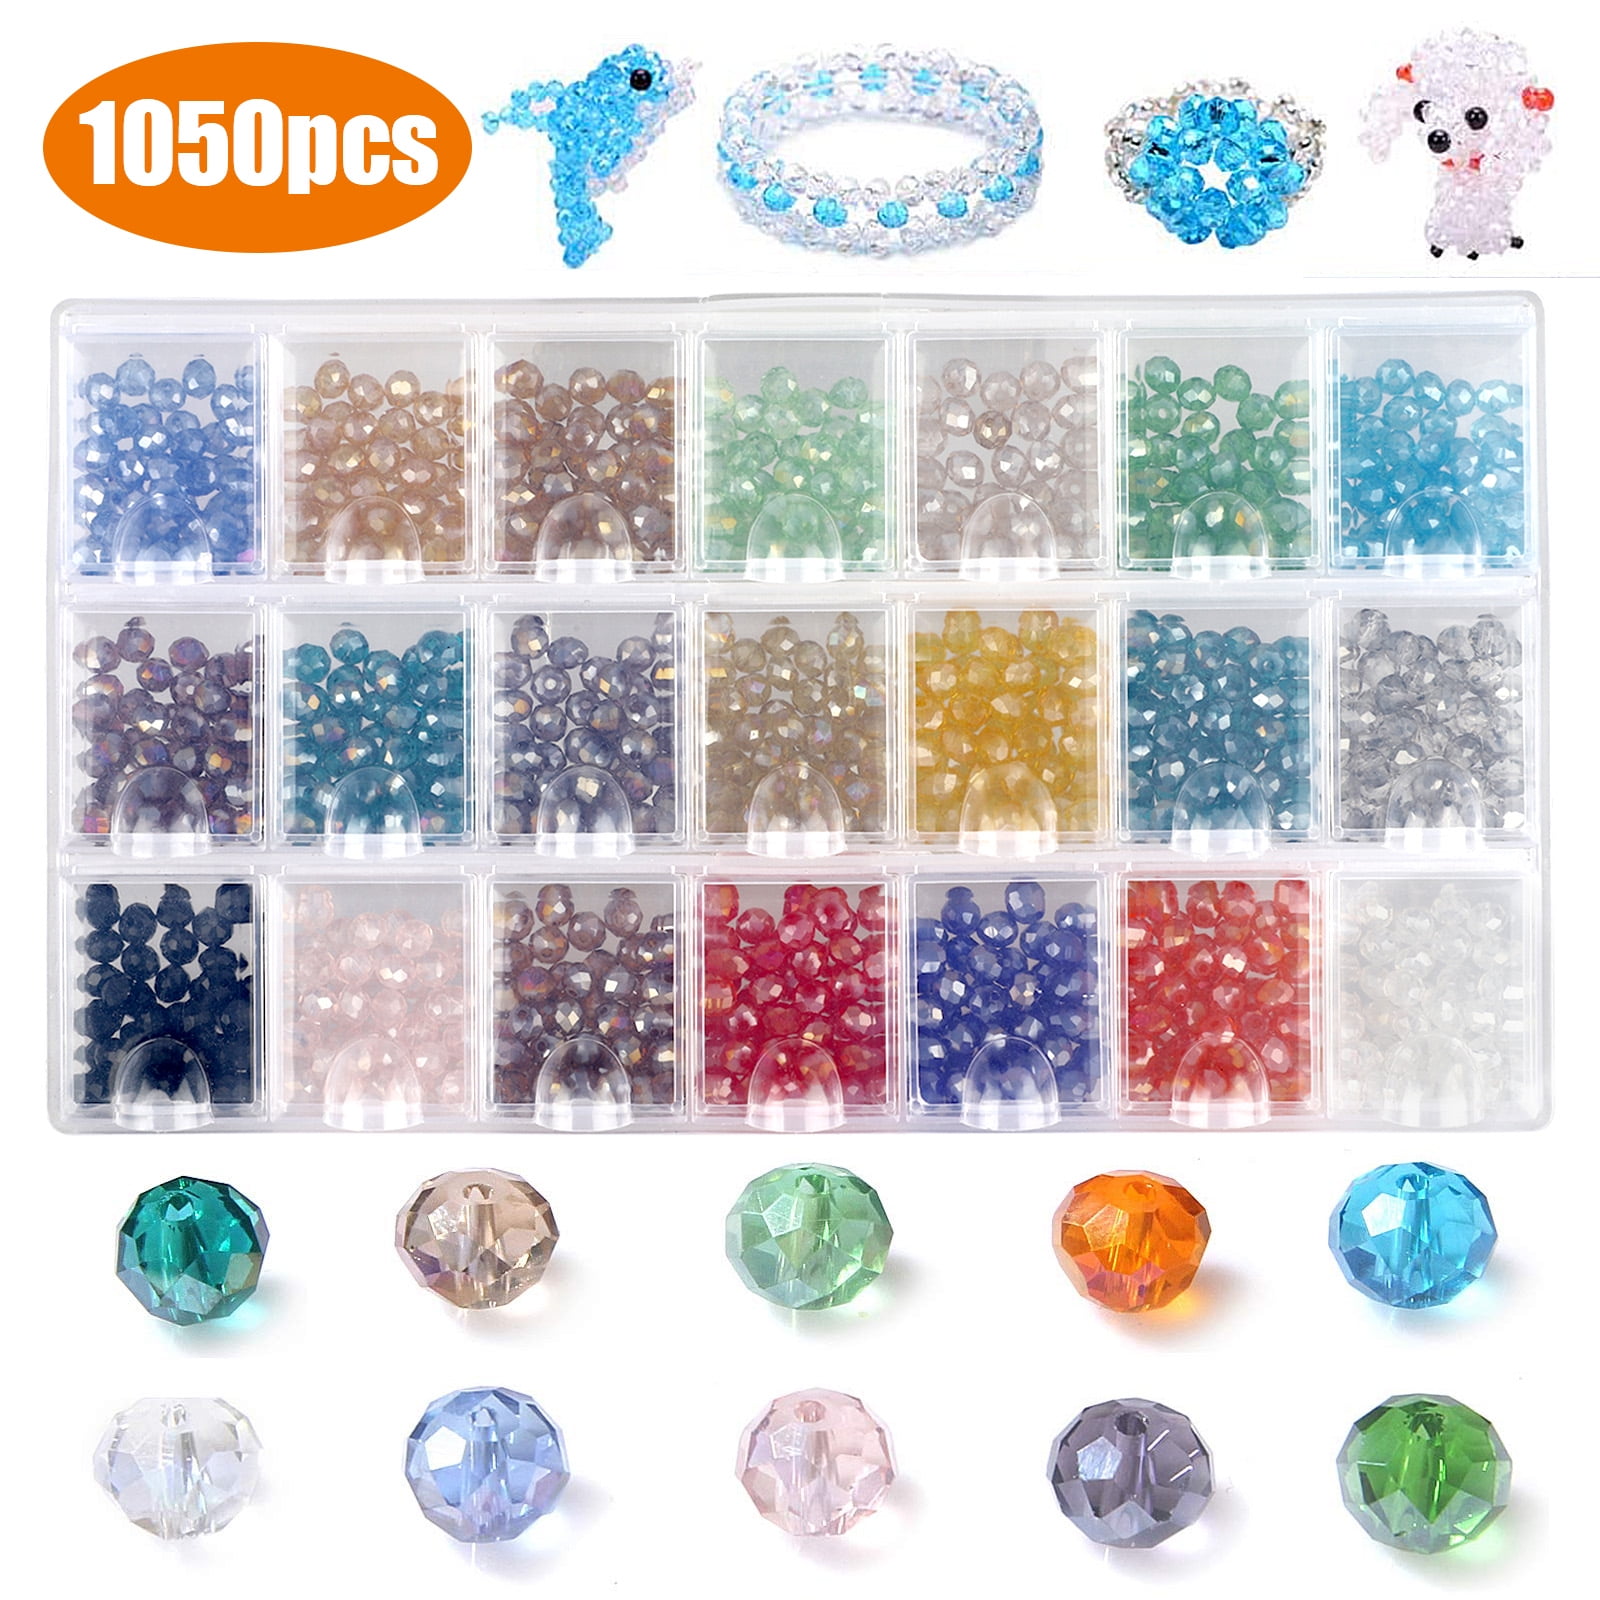 JEBBO 1000pcs Green Rondelle Crystal Glass Beads 2mm 4mm 6mm 8mm 10mm Mixed  Sizes, Faceted Briolette Crystal Glass Spacer Beads for Jewelry Making